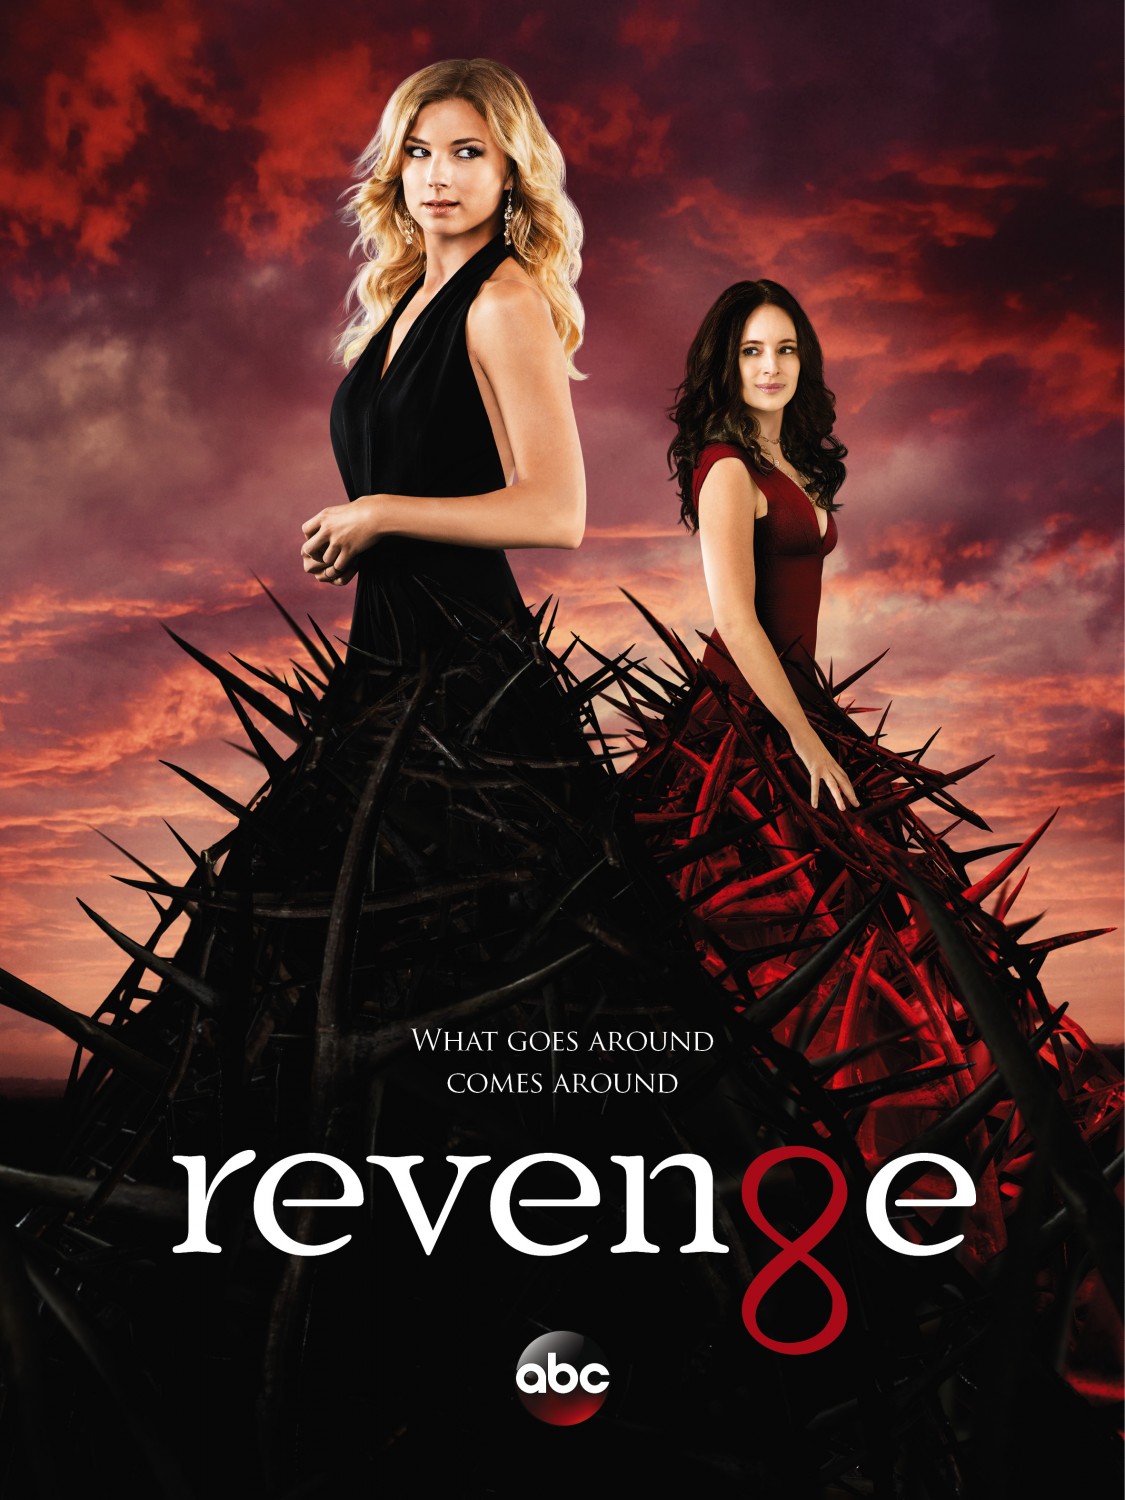 Extra Large TV Poster Image for Revenge (#4 of 4)